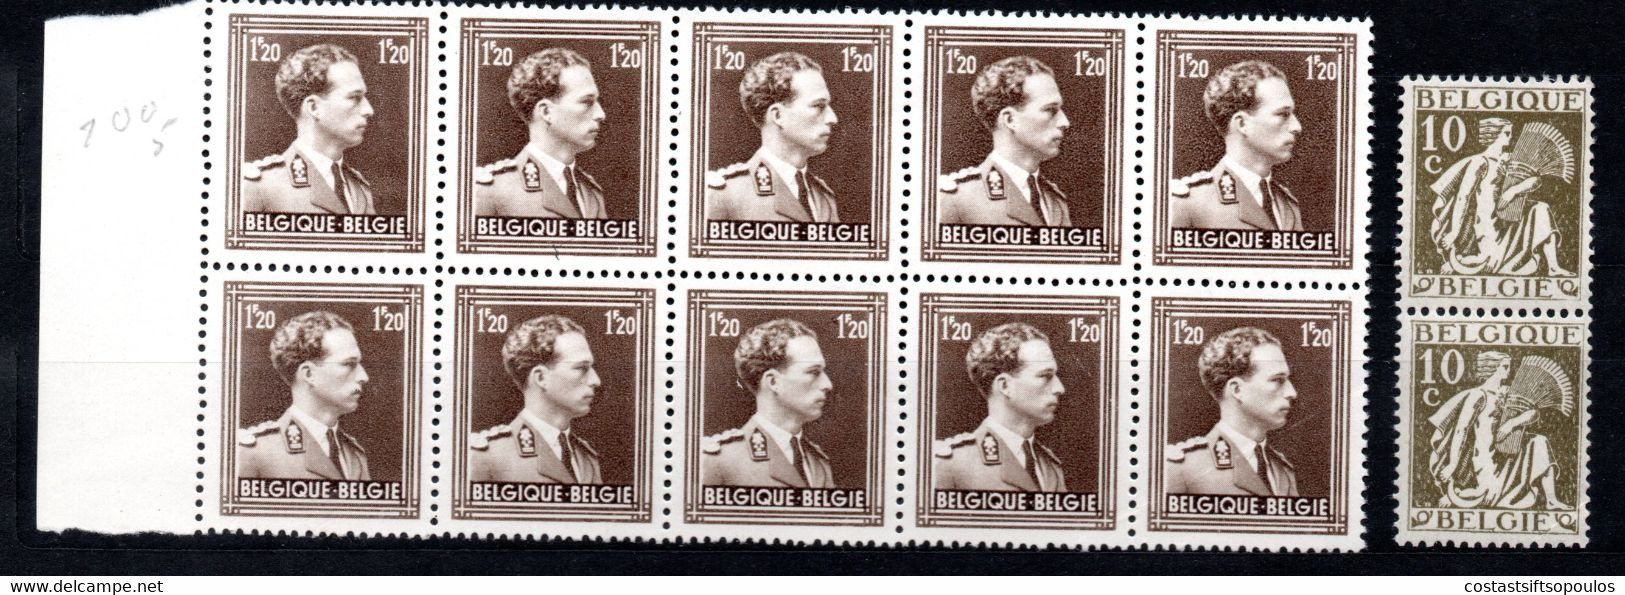 1327. BELGIUM. 1932-1956, GLEANER, MERCURY, KING LEOPOLD III MNH LOT (2 PAGES) 9 SCANS